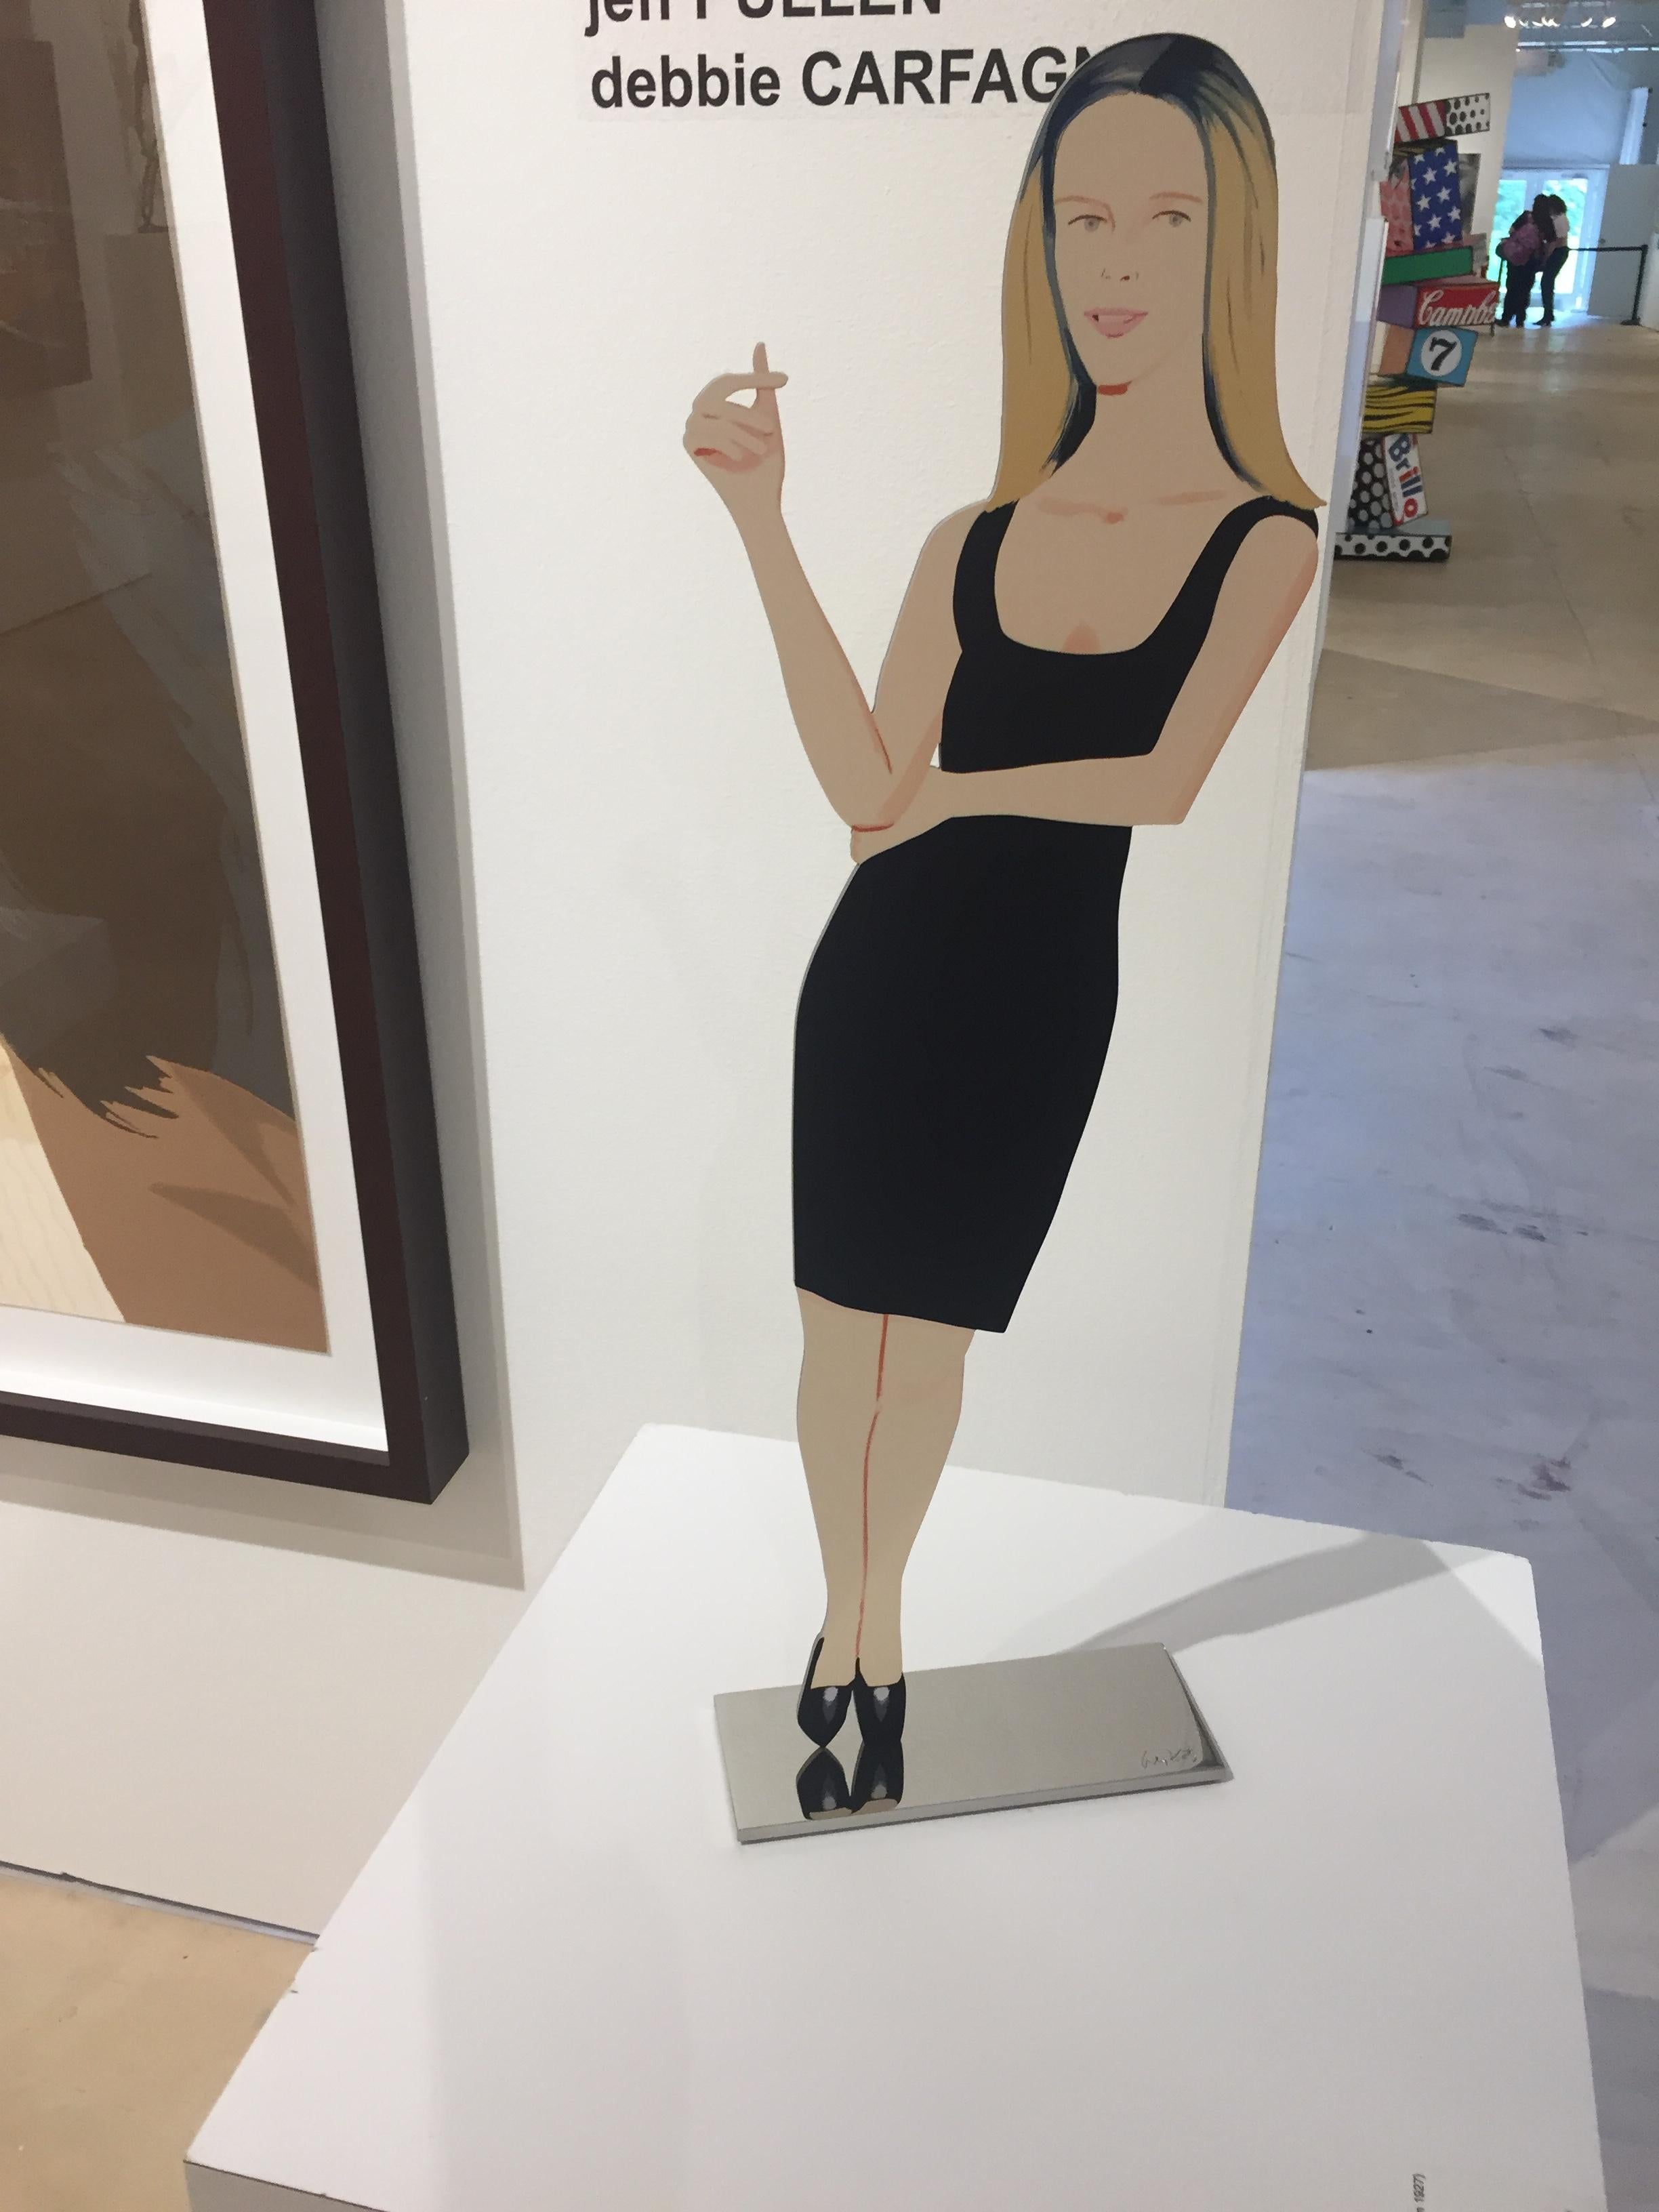 This sculpture by Alex Katz is painted on both side and can be viewed from both directions.  It is part of a series of 9 works from his Black Dress painting series, which are very large original paintings and life size sculptures.  The work has its